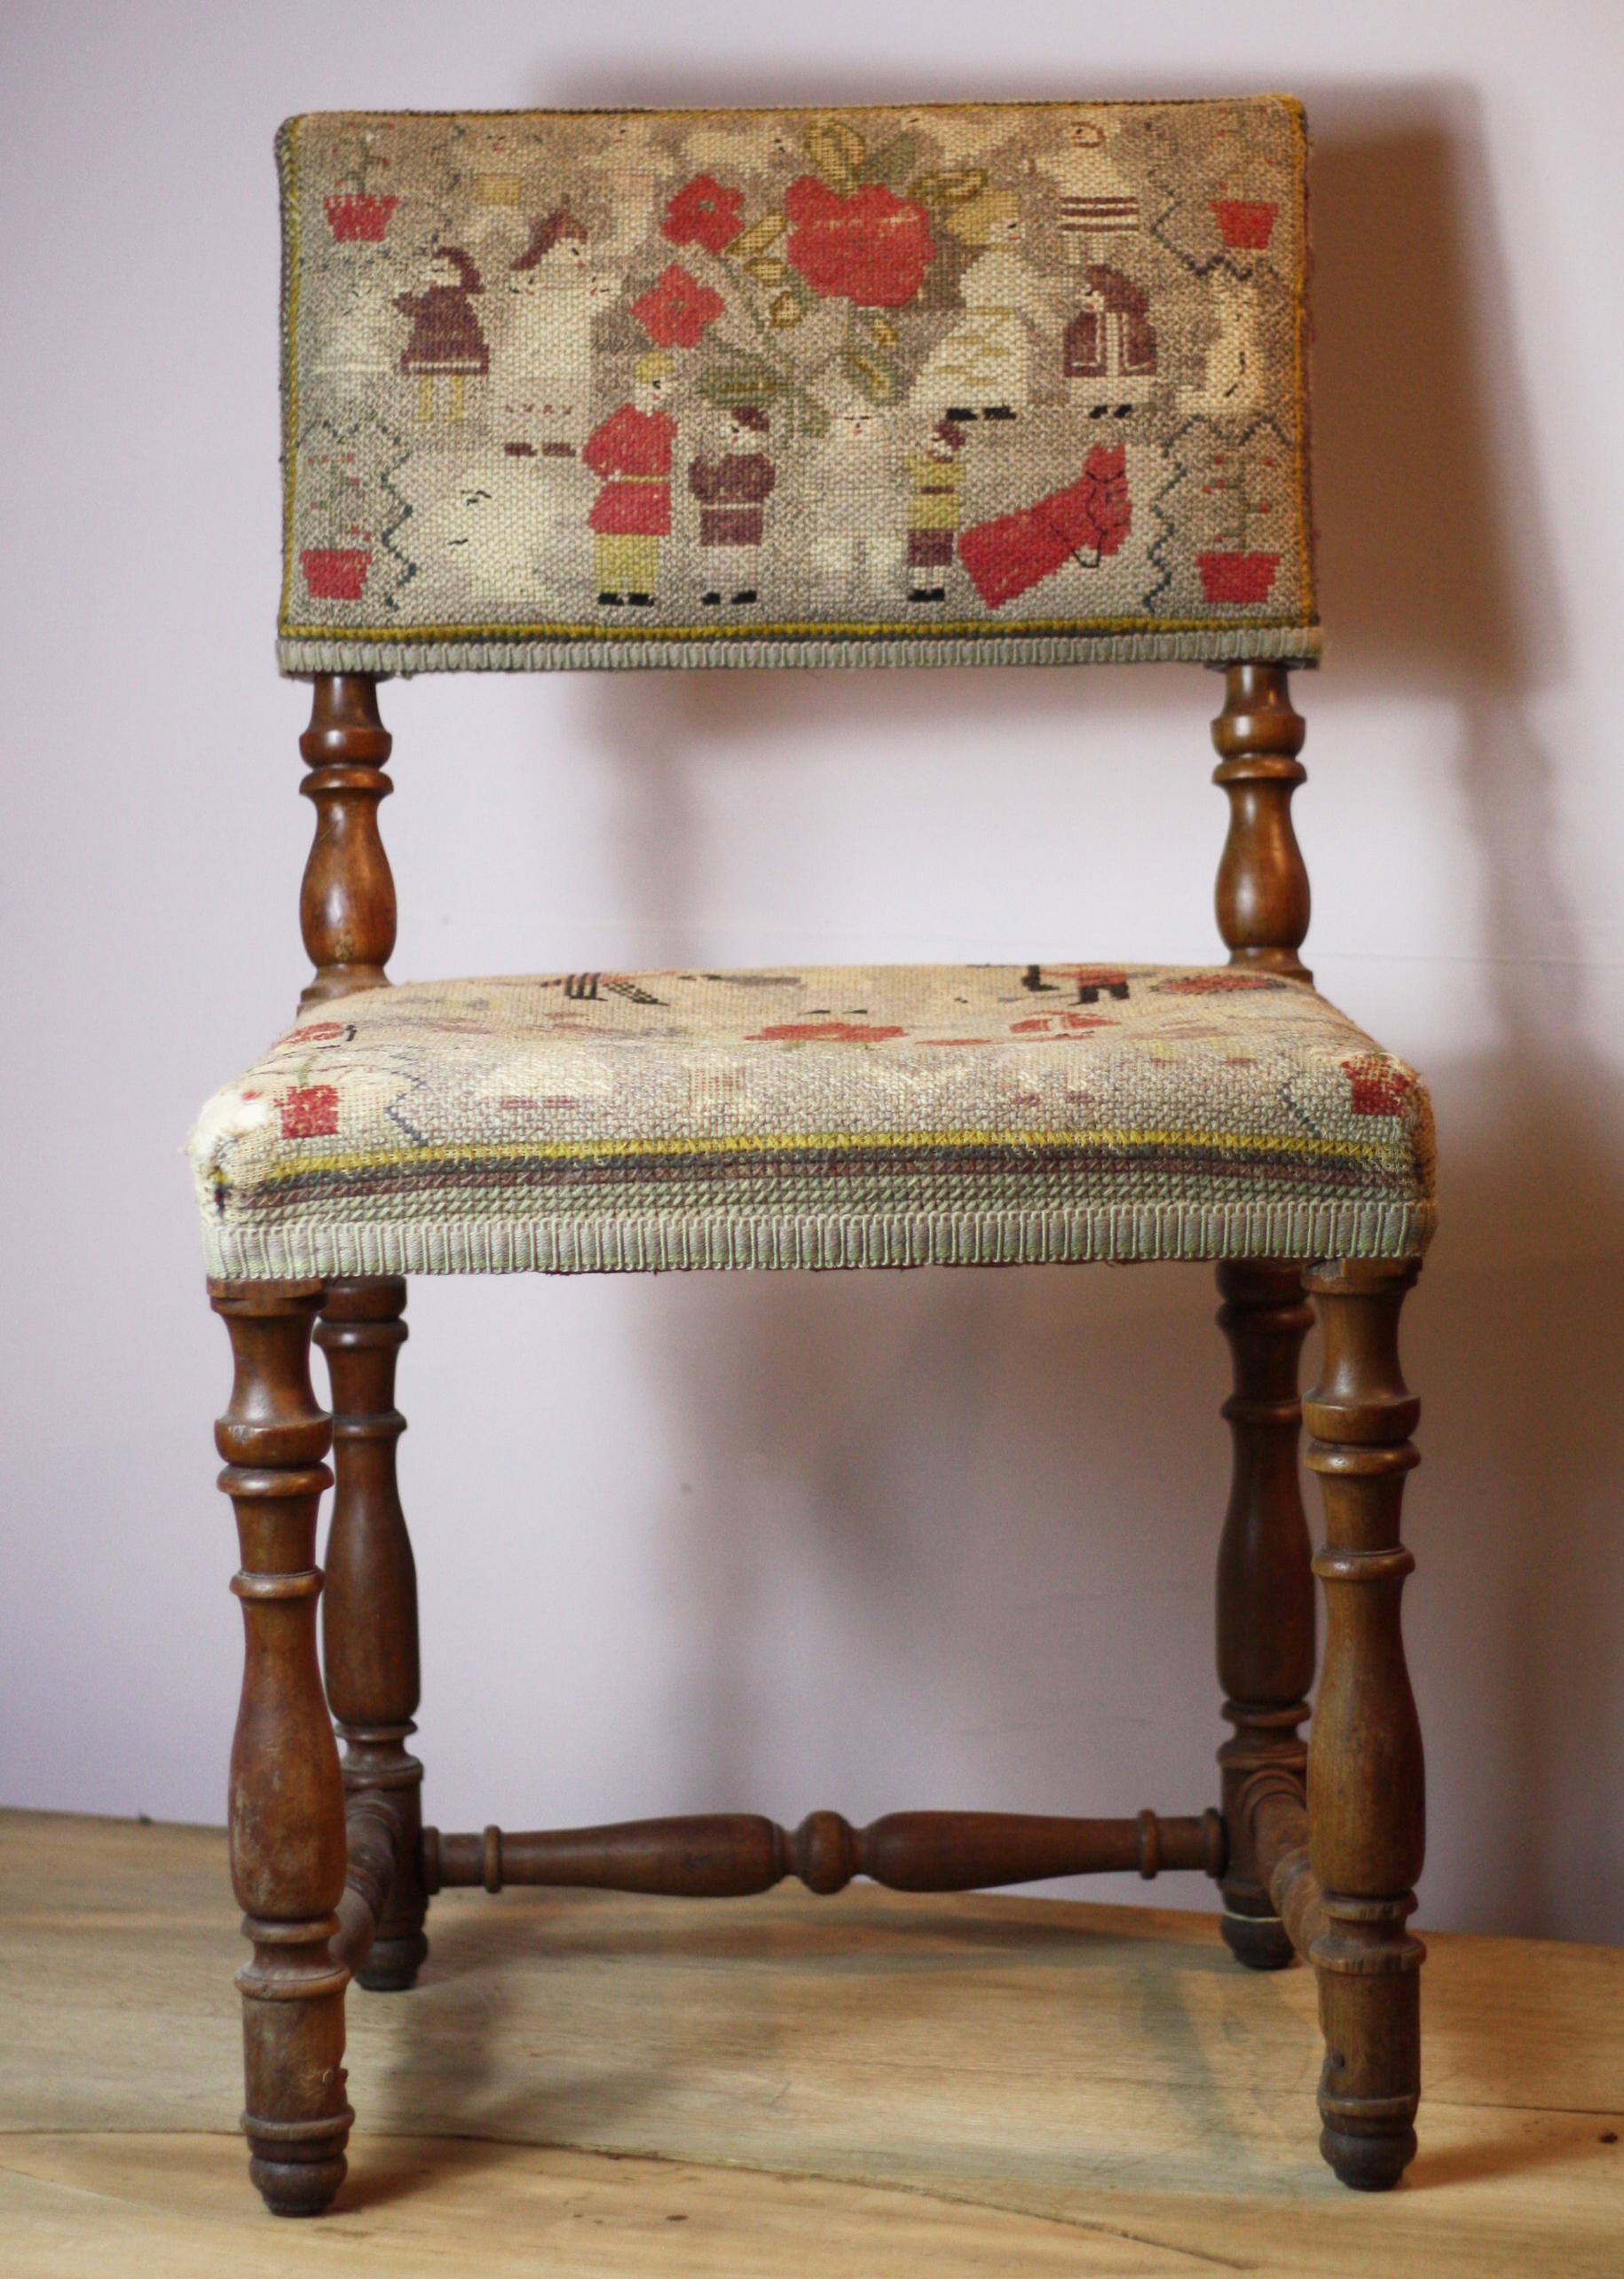 Pair of English country tapestry chairs, with naive depictions of people, animals and plants.